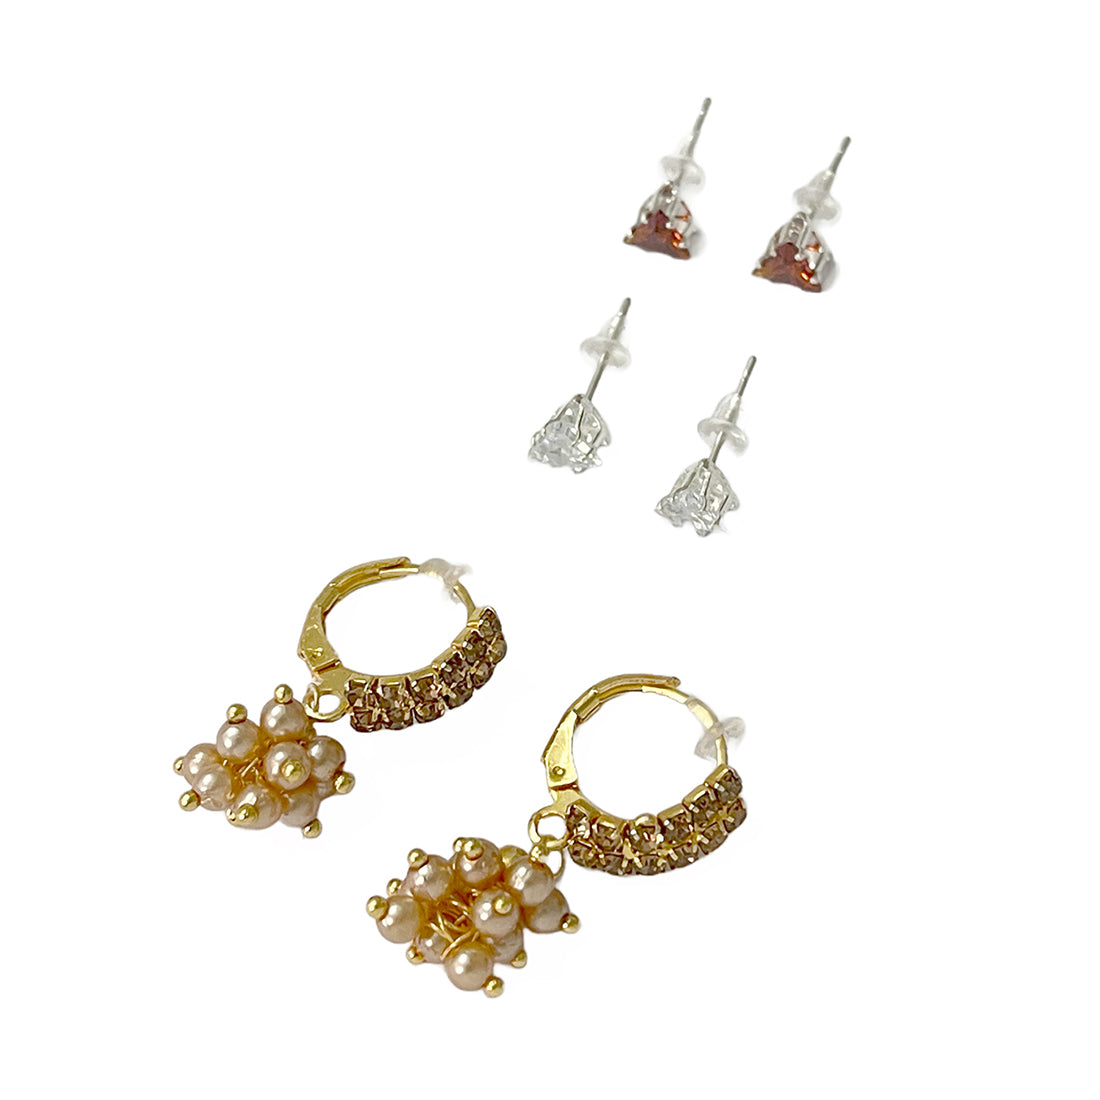 Set Of 3 Triangular Silver-Toned Diamante Studs & Gold-Toned Ethnic Studded Hoop Drop Earrings